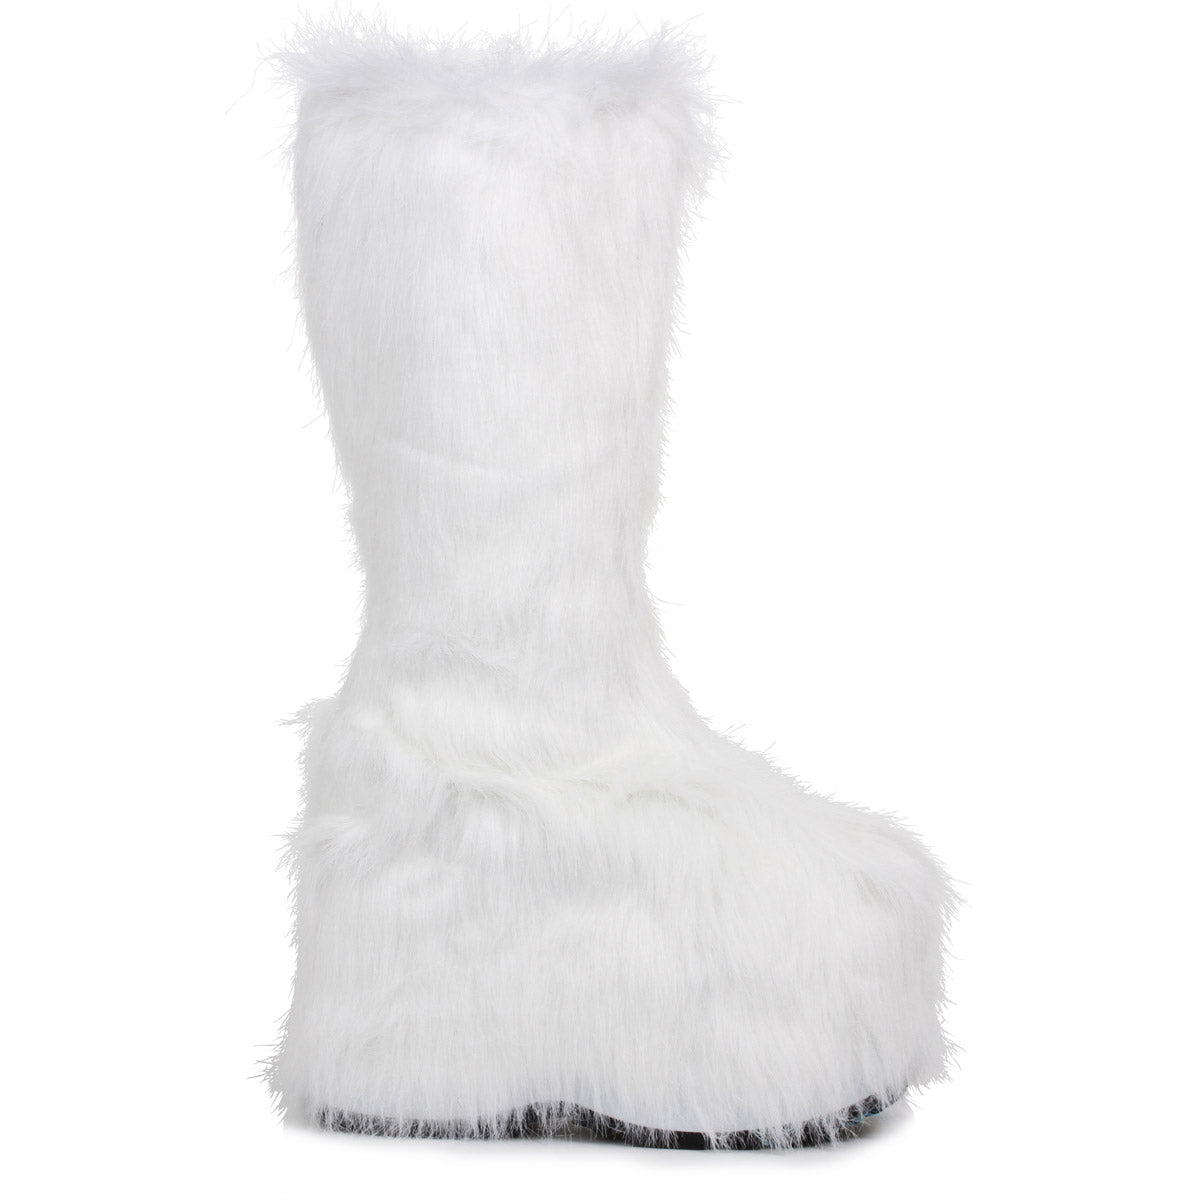 5" Chunky Heel Platform Boot with faux fur. Ellie  500/FUZZ/WHT